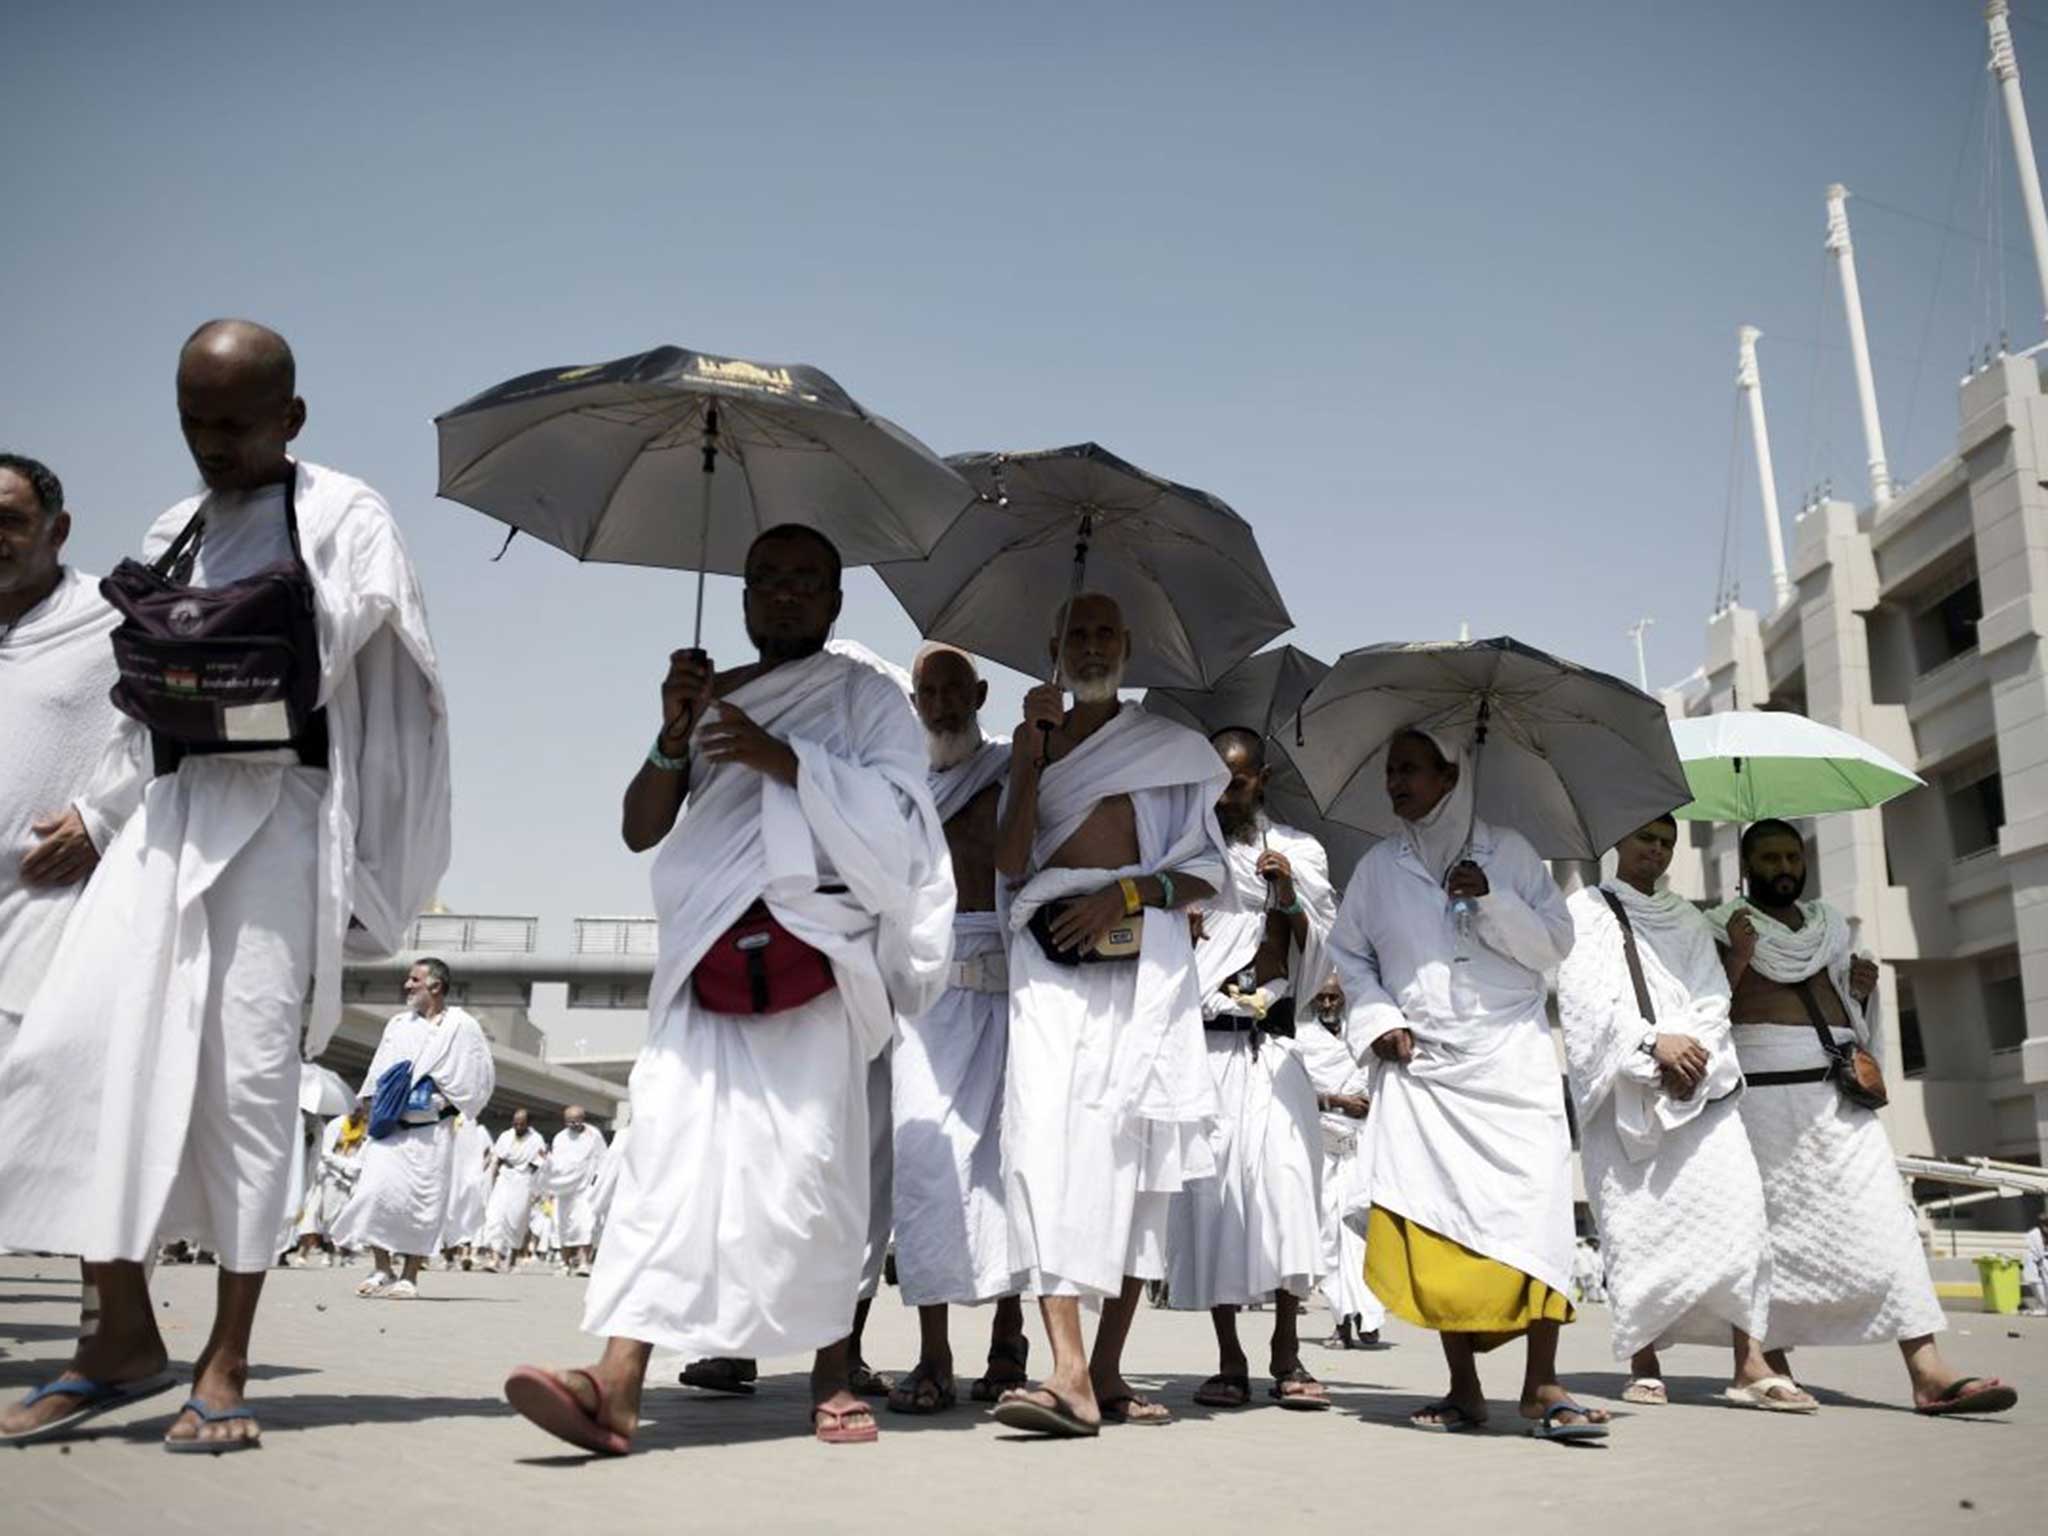 Many are angry at Saudi authorities for a perceived lack of safety over Hajj